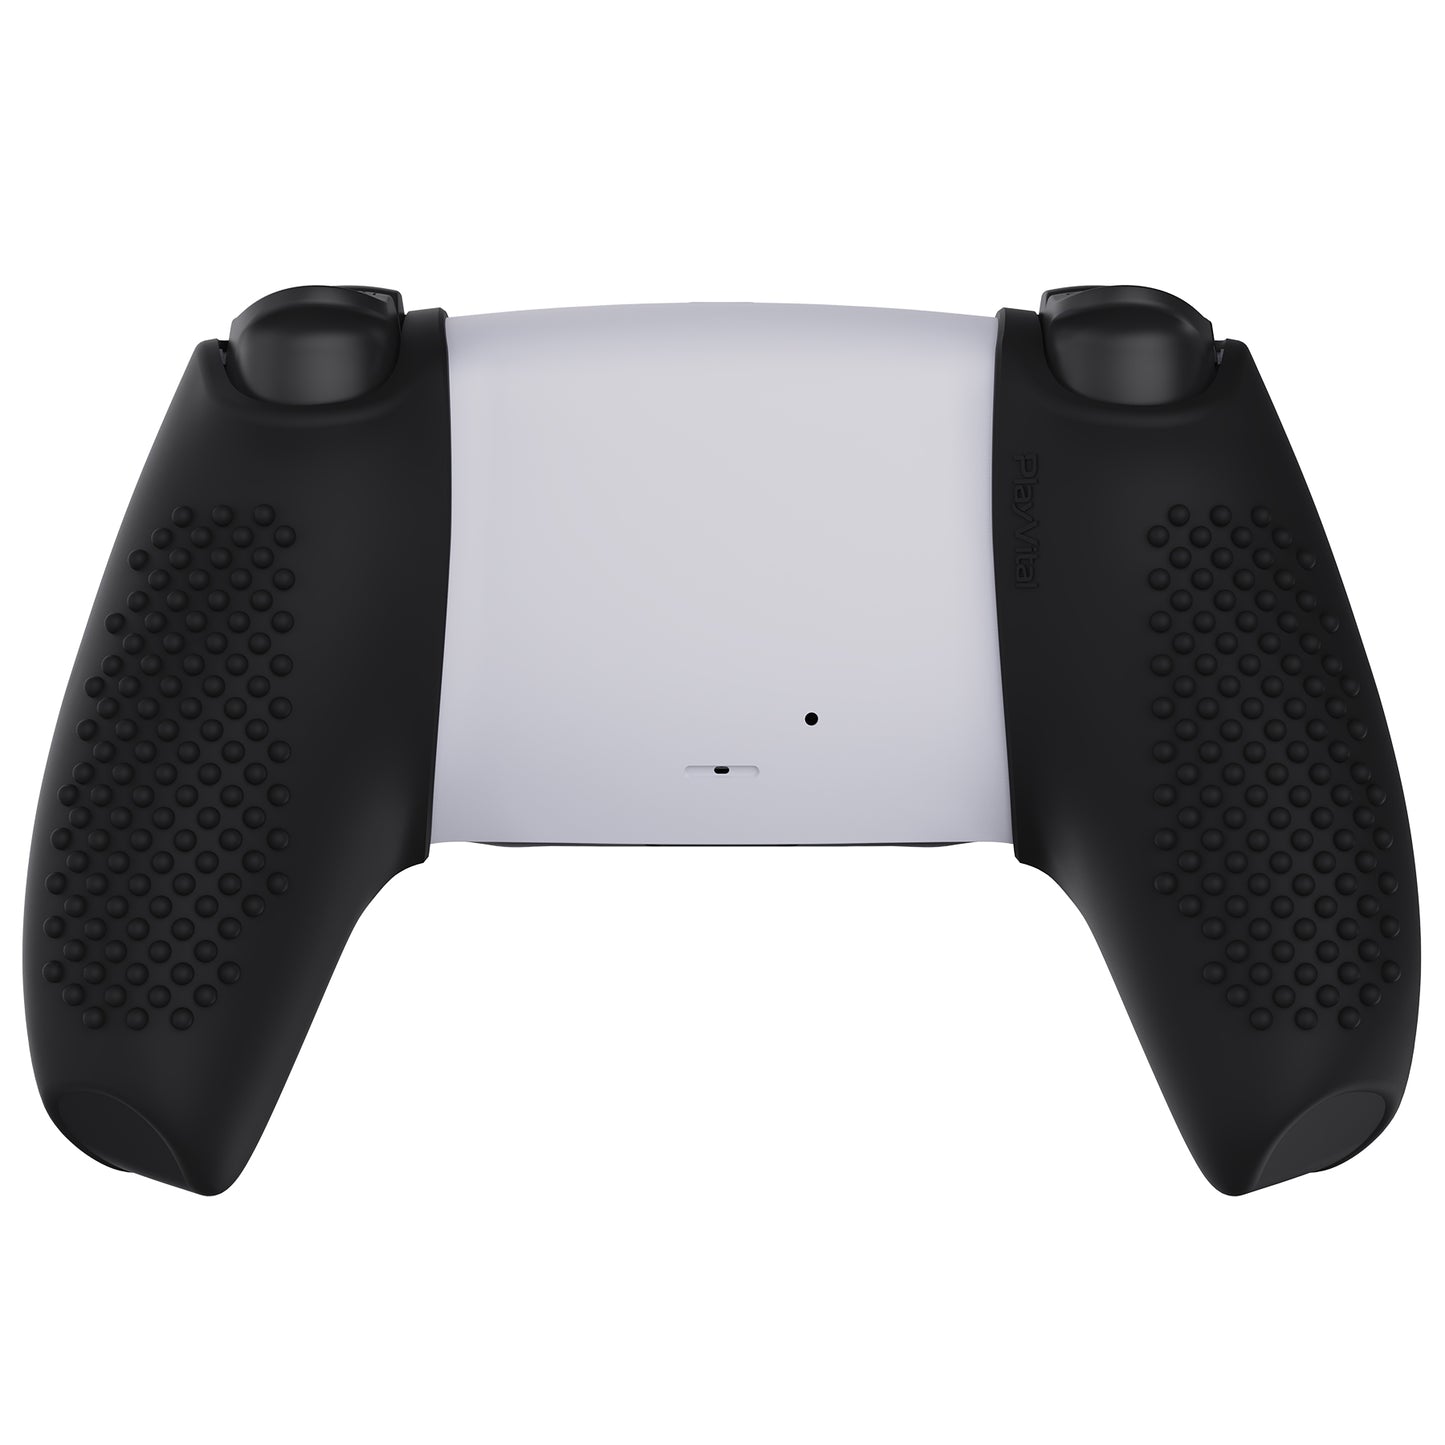 PlayVital 3D Studded Edition Anti-Slip Silicone Cover Skin with Thumb Grip Caps for PS5 Wireless Controller, Compatible with Charging Station - Black - TDPF015 PlayVital